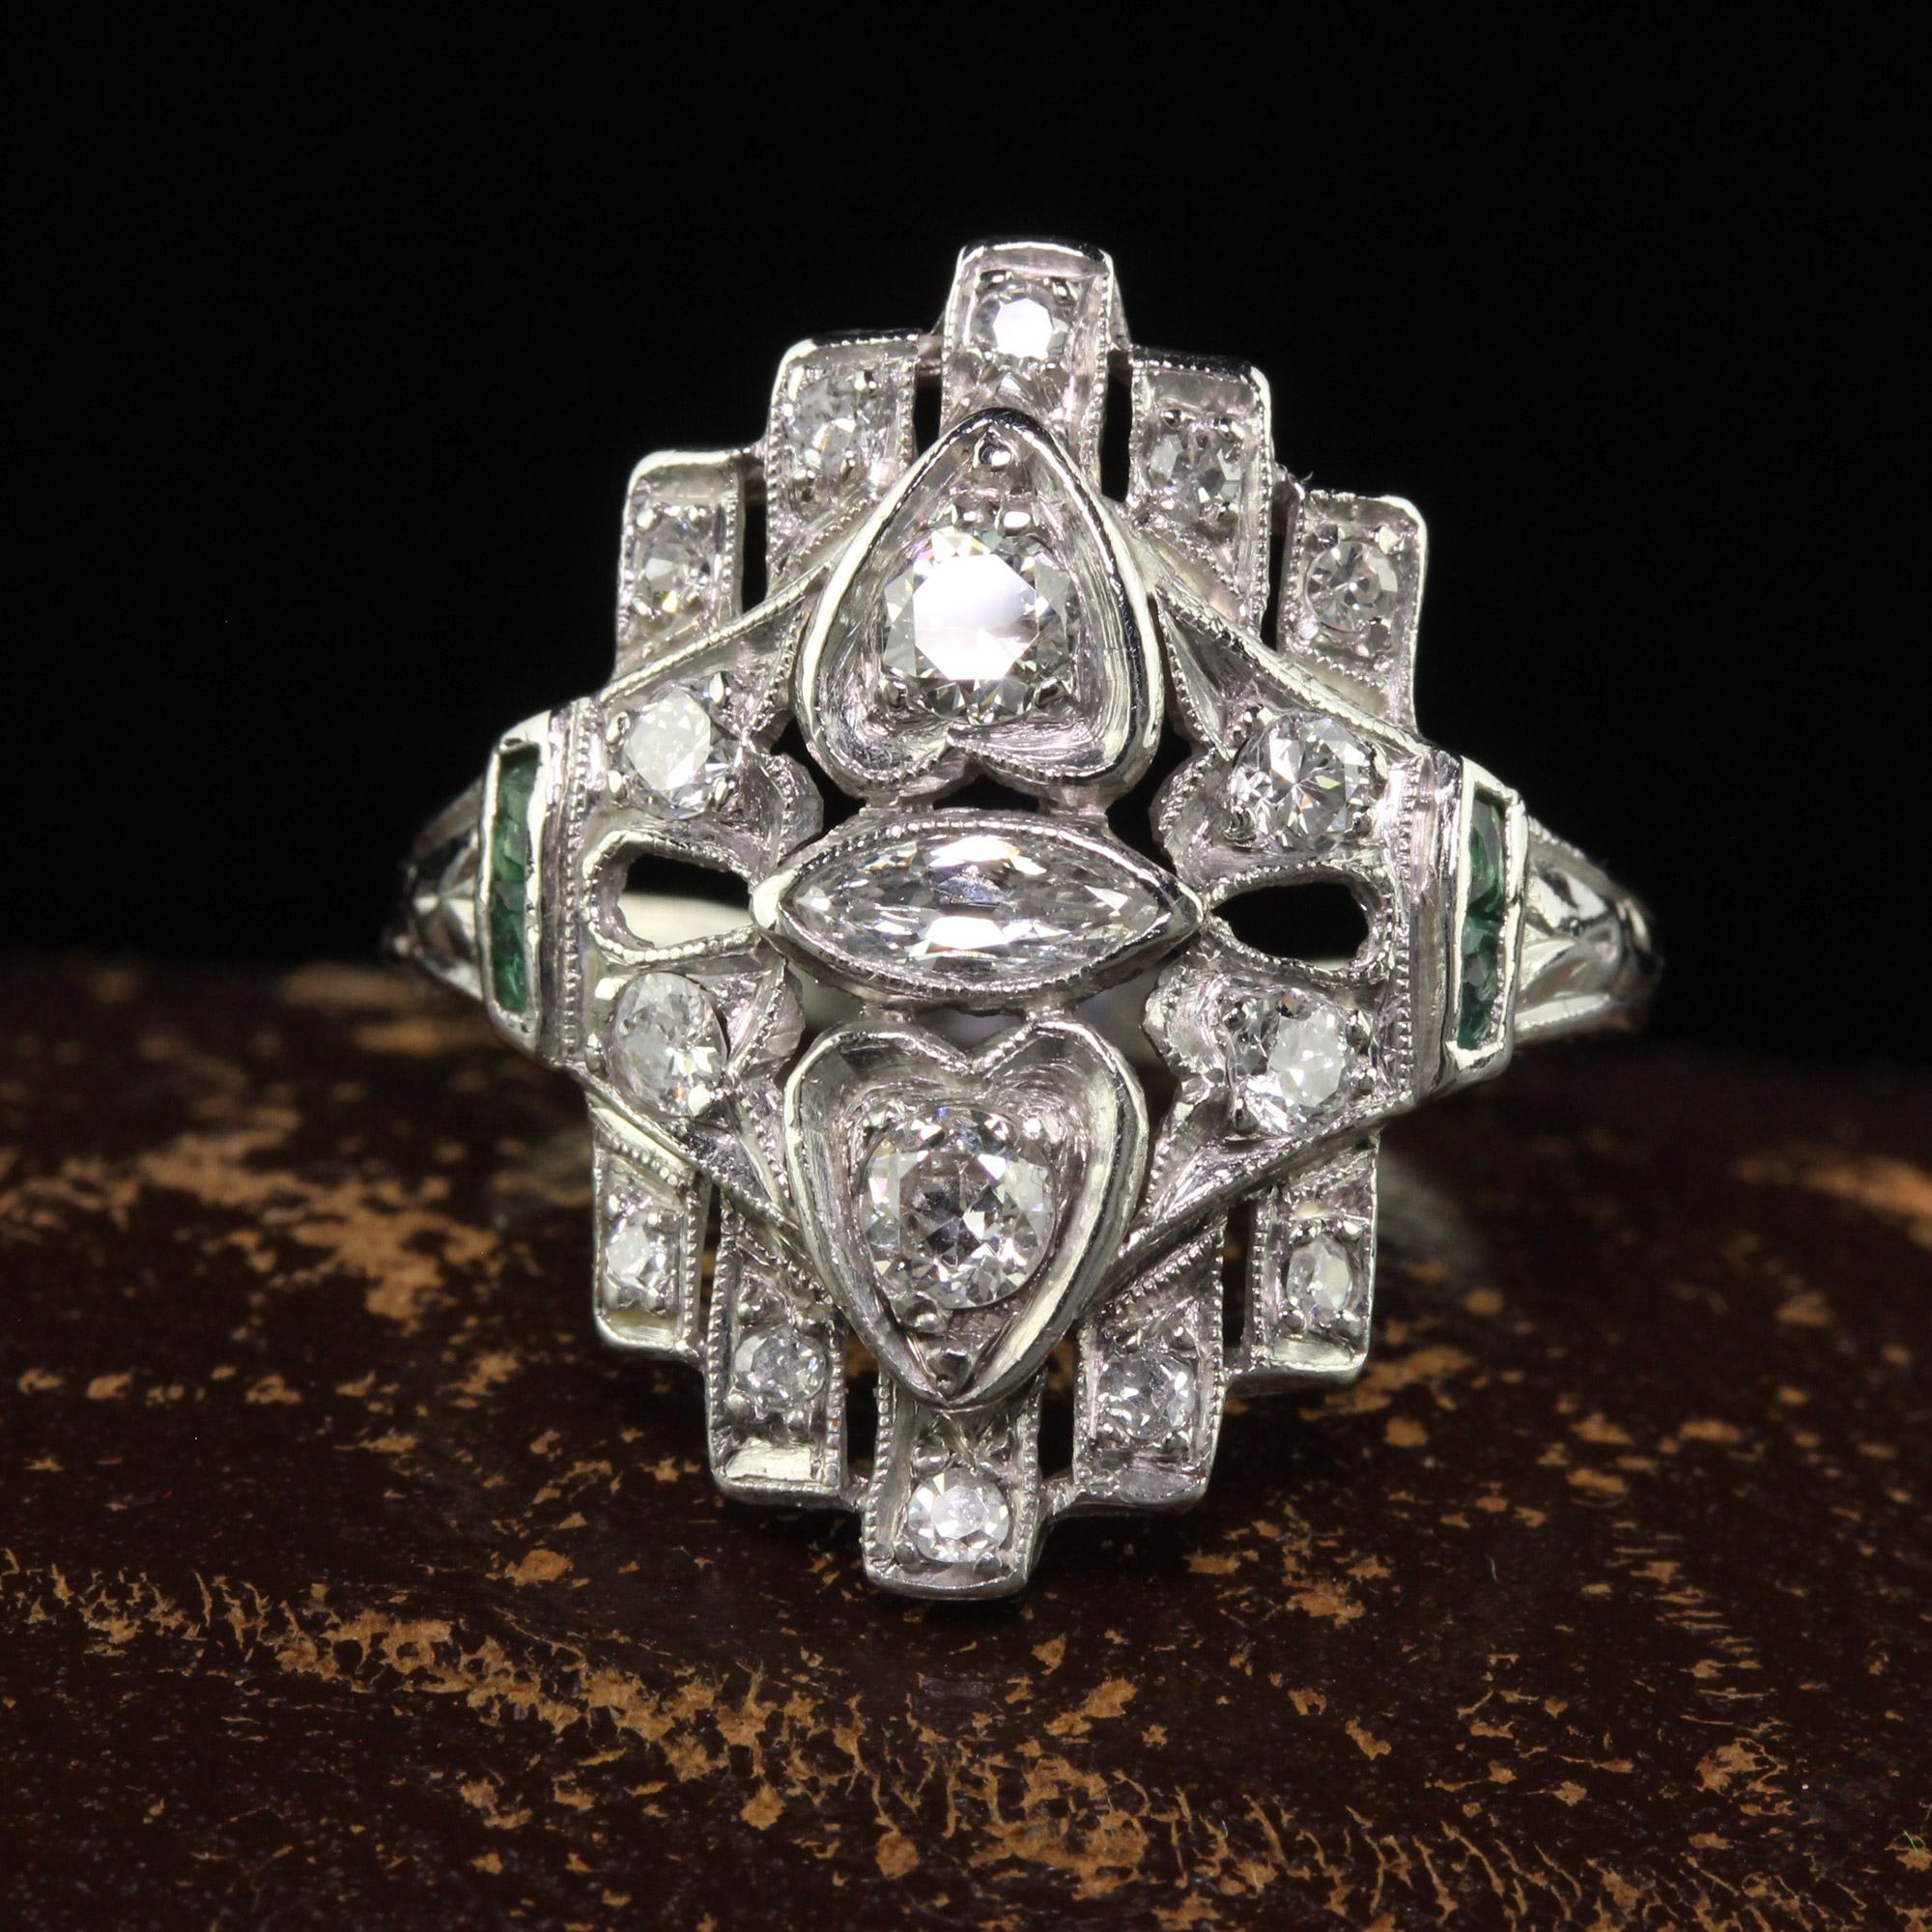 Beautiful Antique Art Deco Platinum Old Euro Marquise Diamond and Emerald Shield Ring. This gorgeous antique shield ring is crafted in platinum. The ring has old cut diamonds and an old cut marquise that is set east to west in the center with